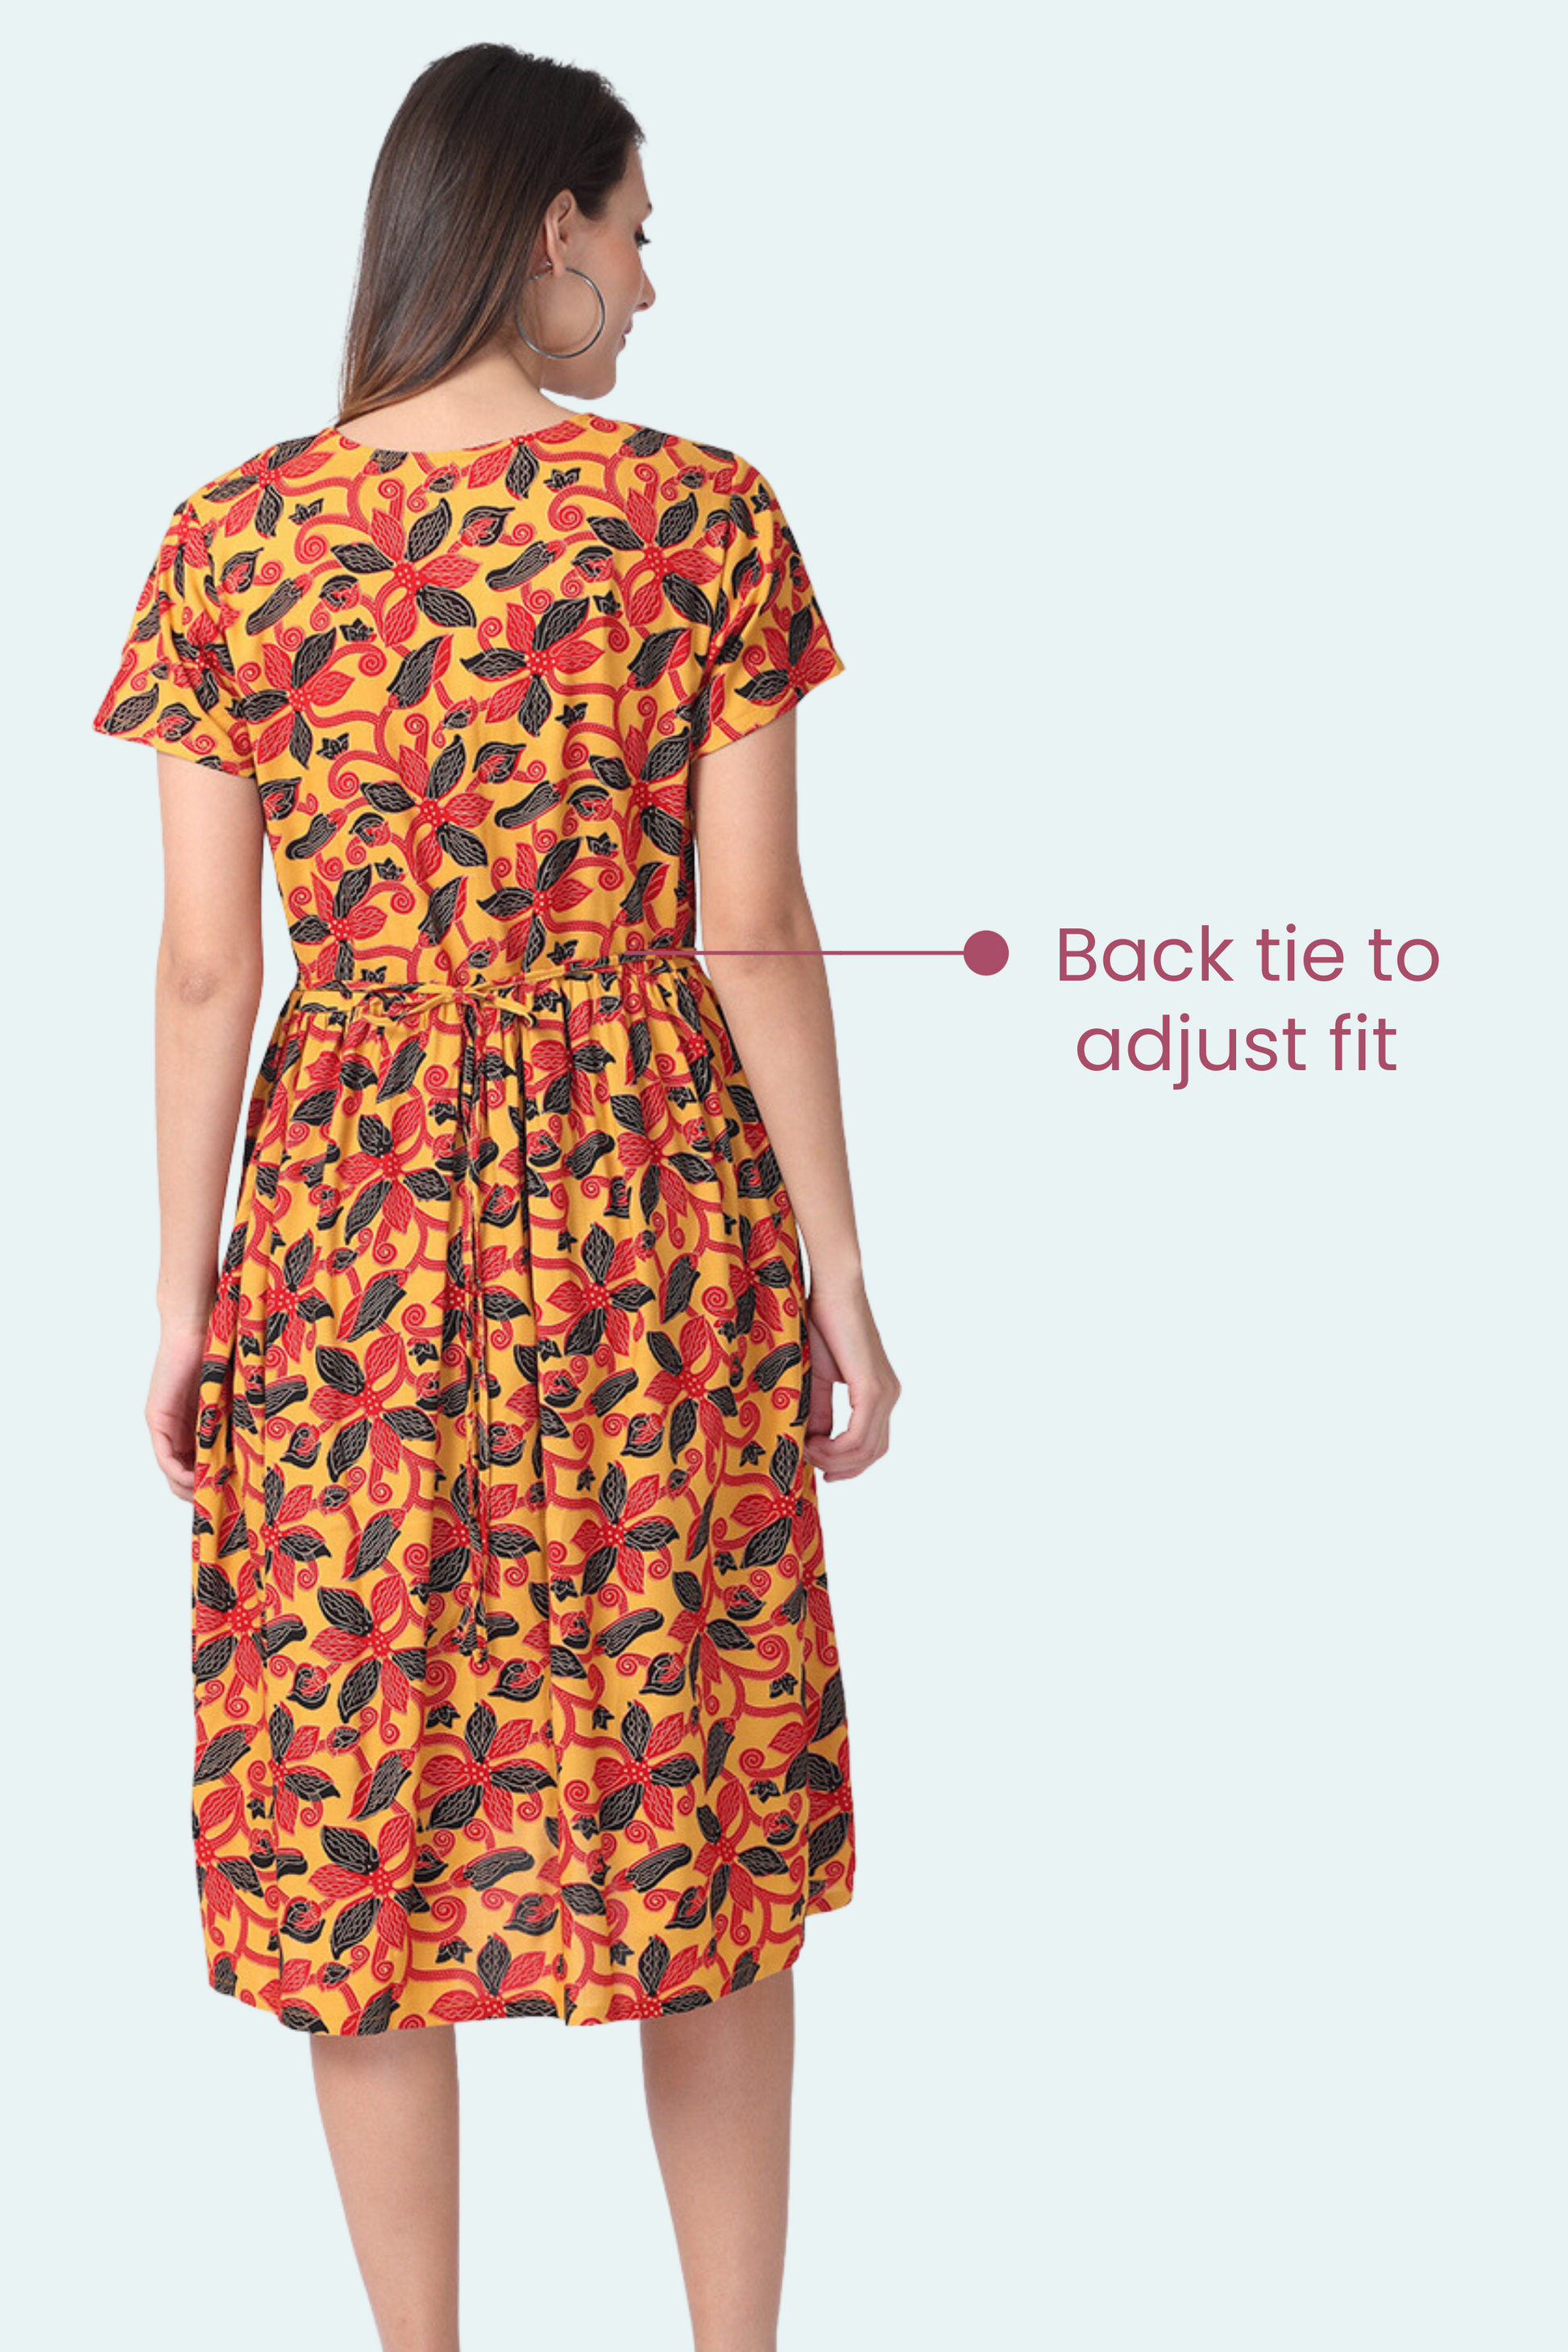 Feeding Dress With Back Tie To Adjust Fit